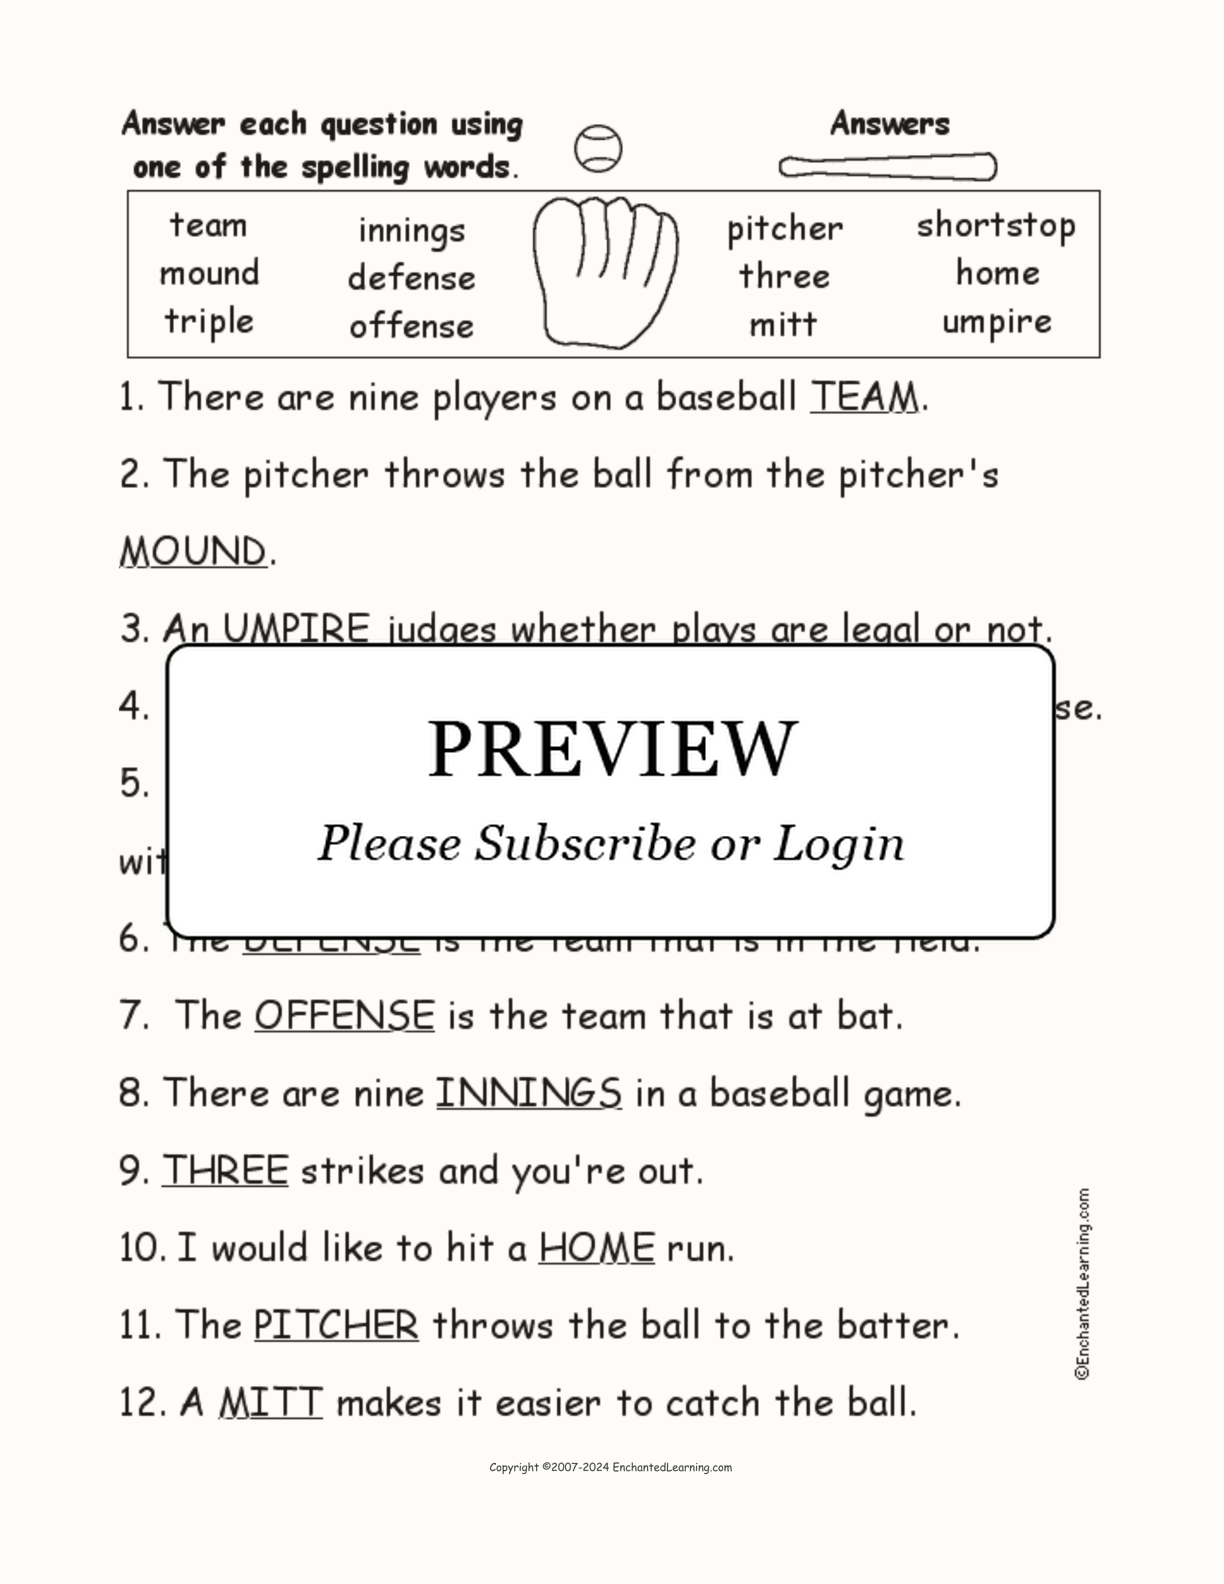 Baseball Spelling Word Questions interactive worksheet page 2